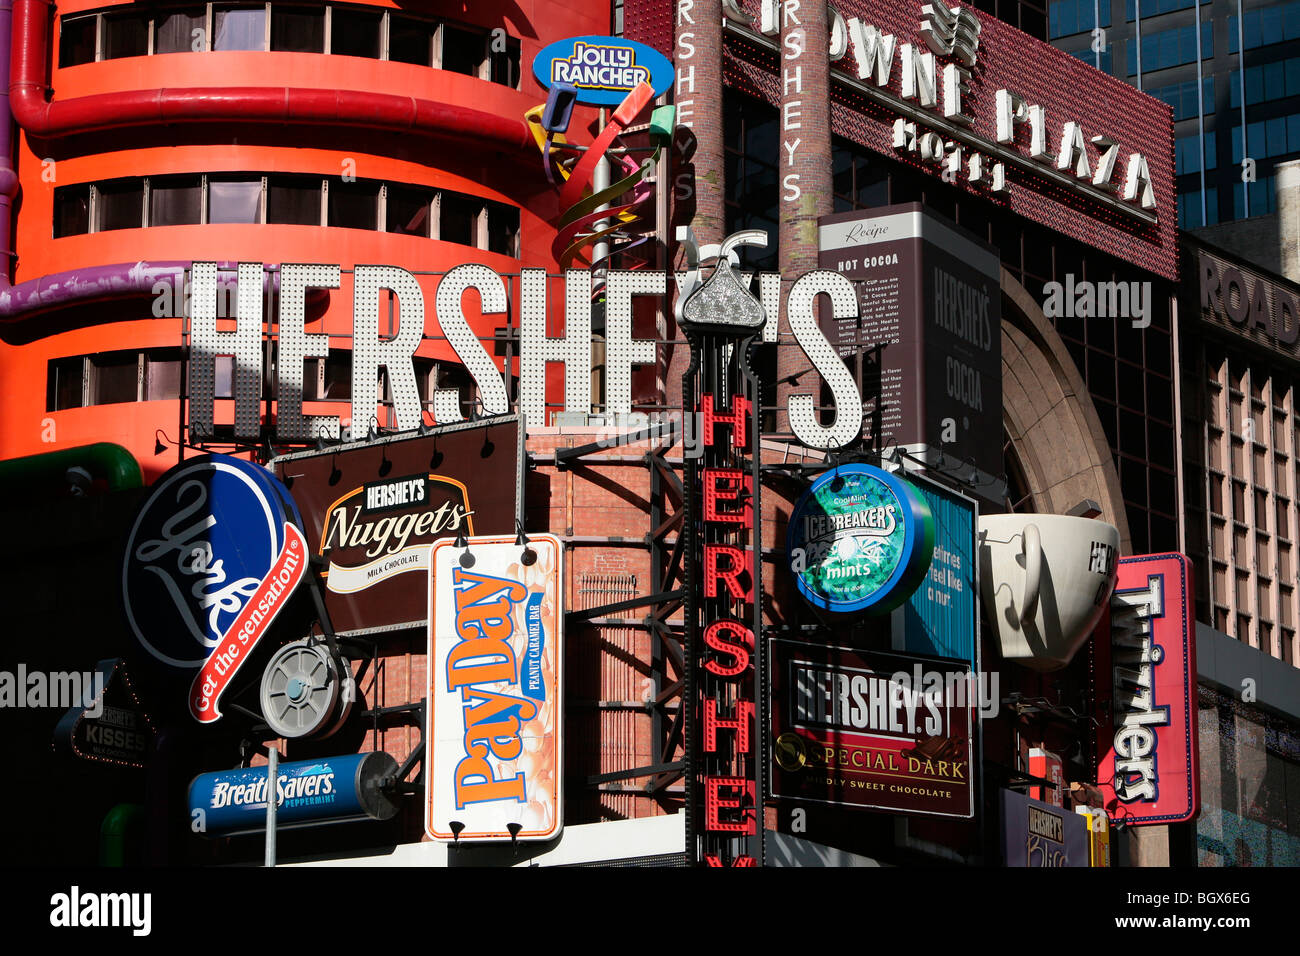 Hershey's store on Times Square New York Stock Photo